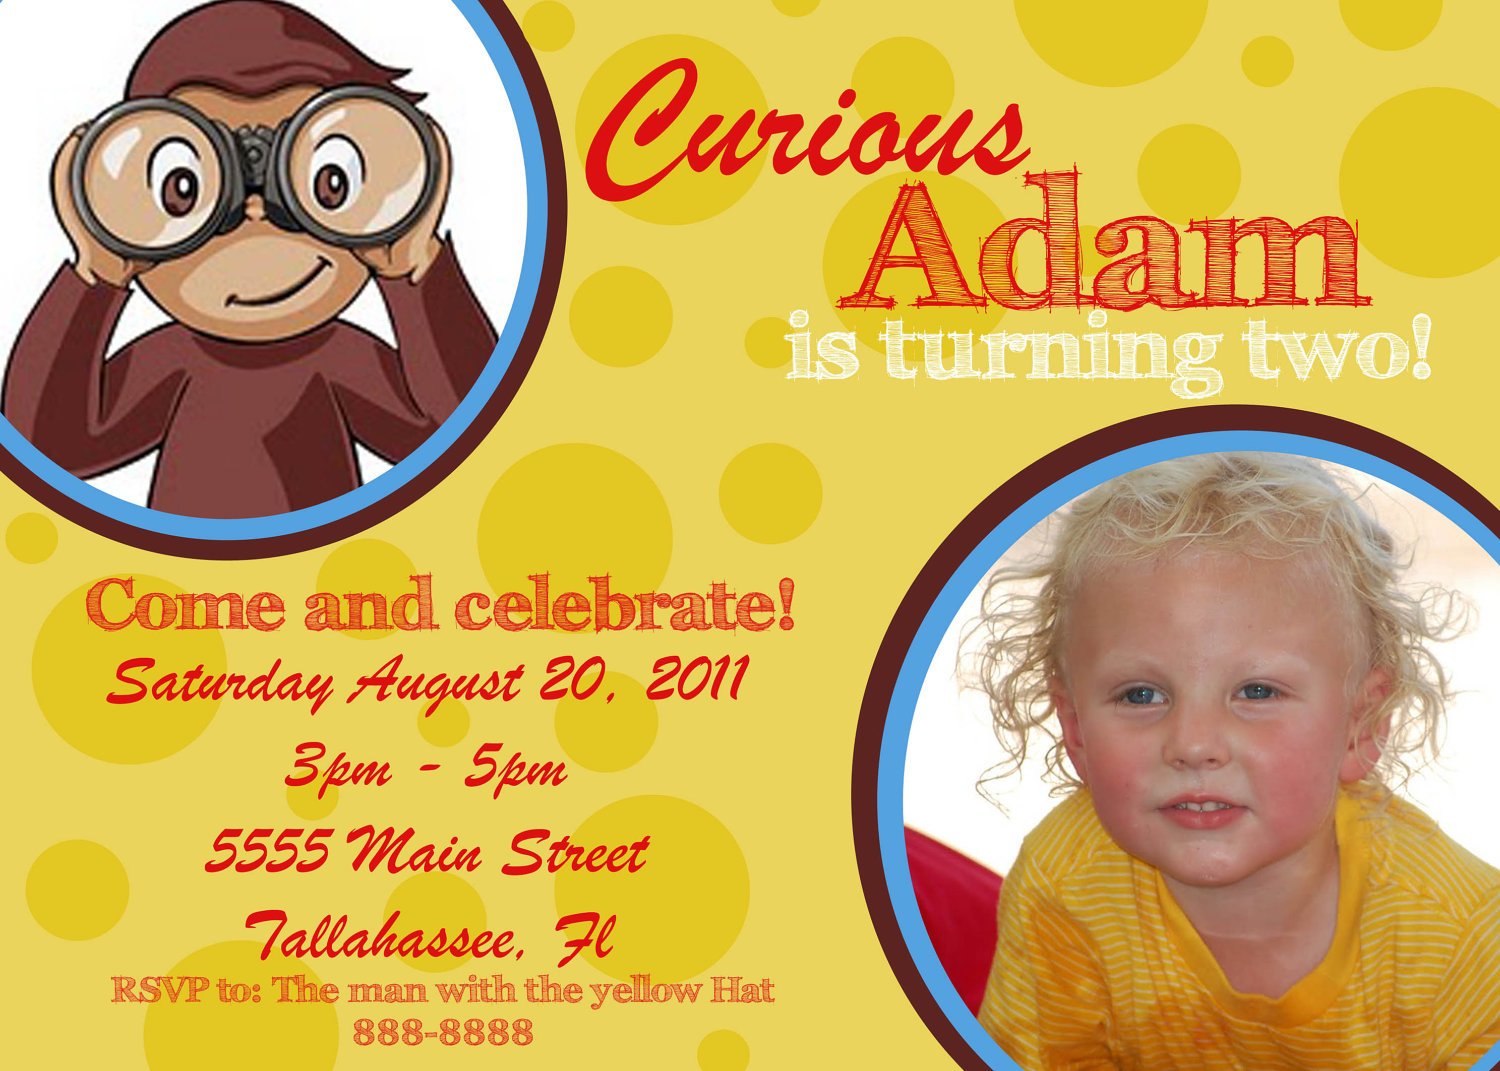 boy curious george personalized birthday invitations